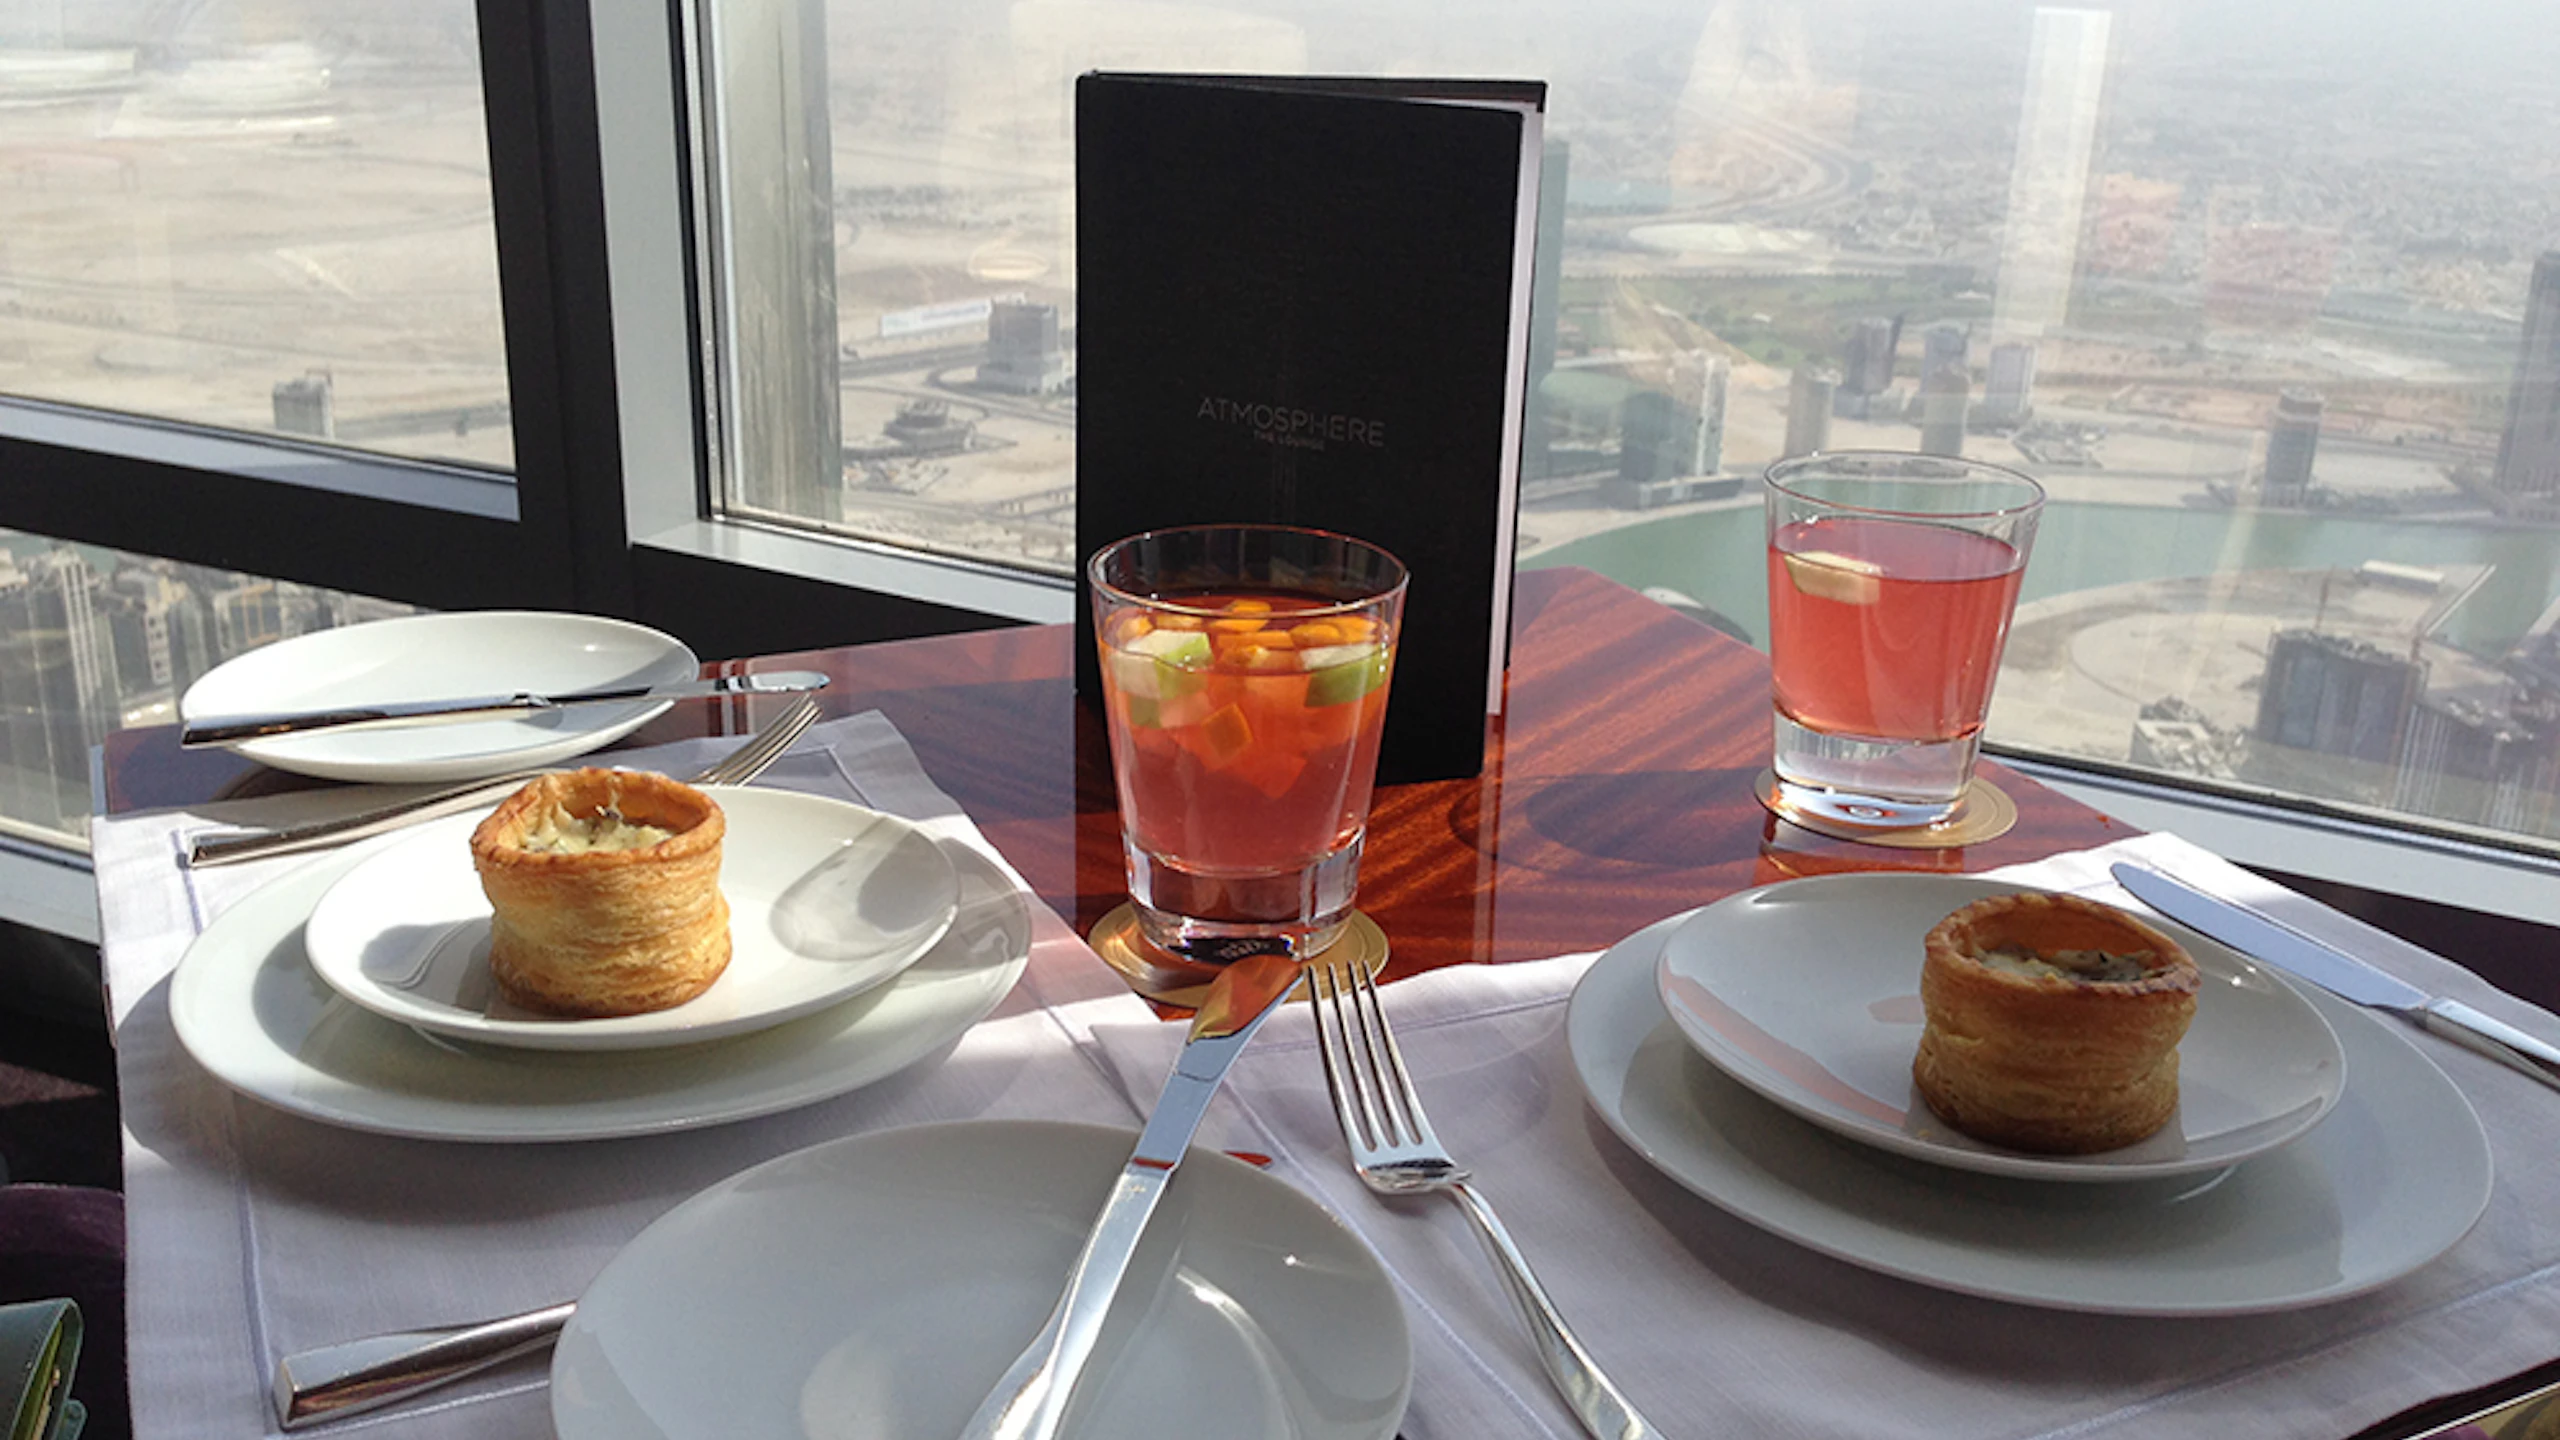 Dine experience at Burj Khalifa - Atmosphere with Discover Dubai by Night Ticket